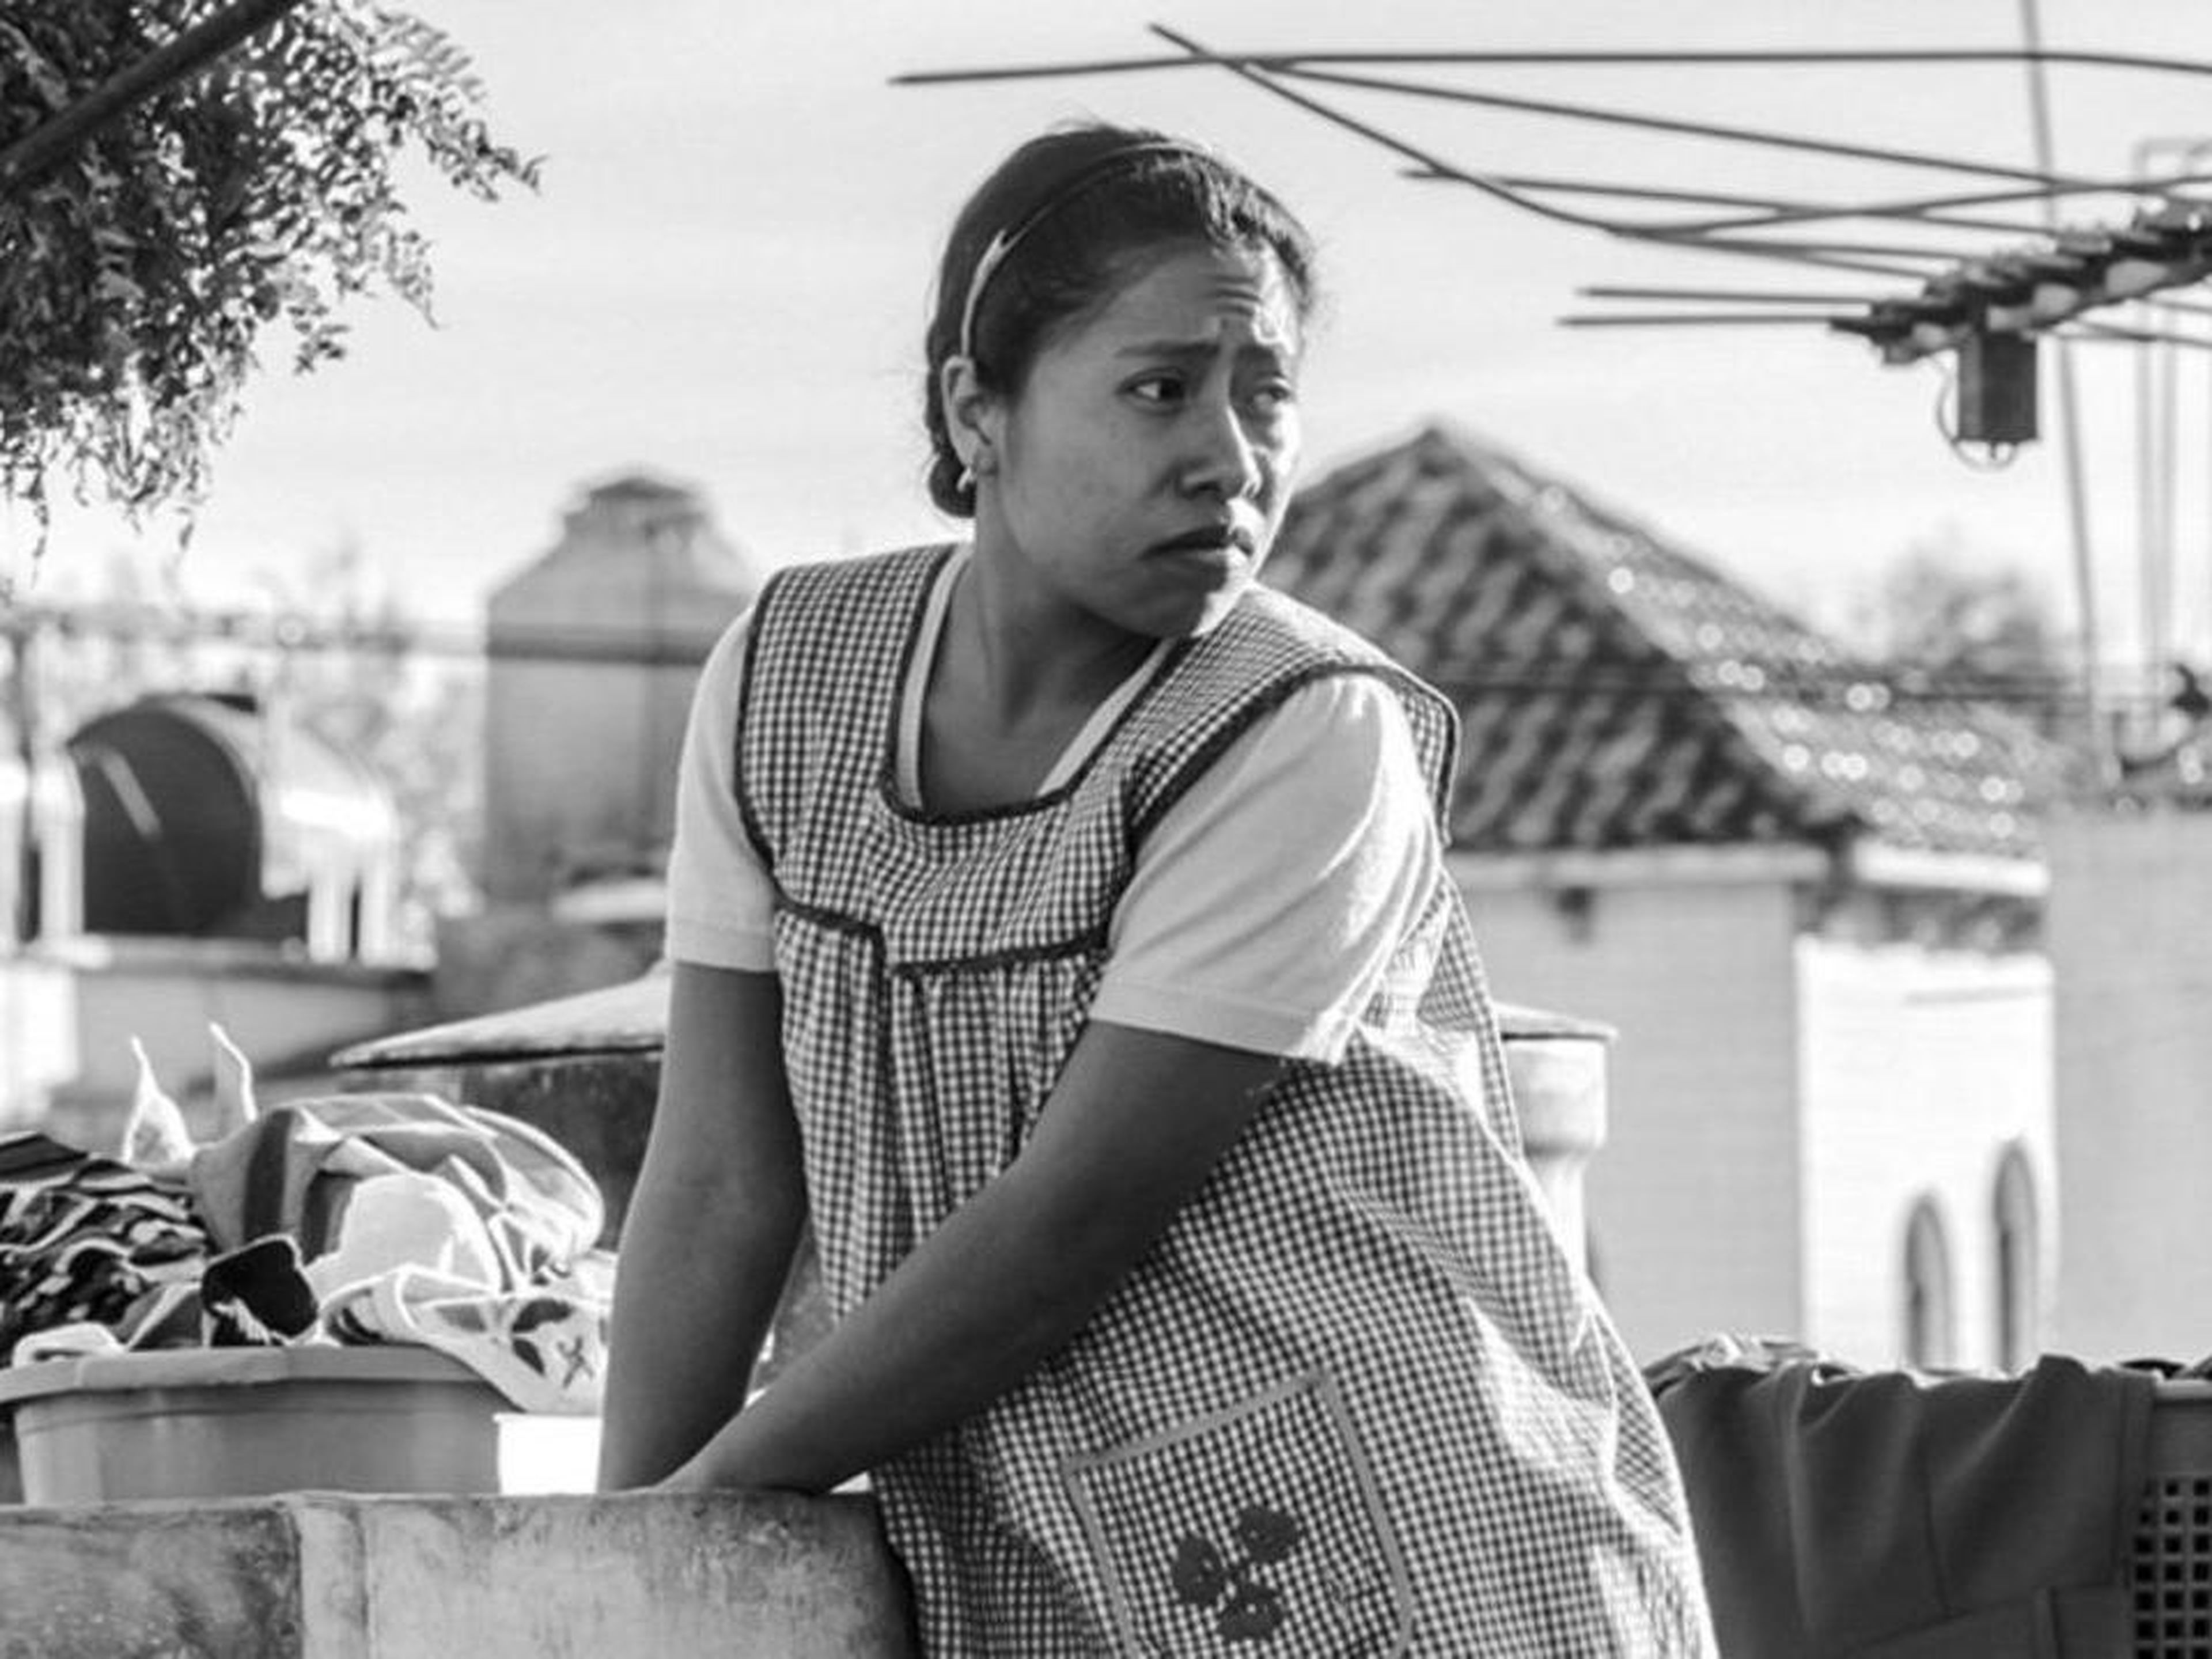 "Roma" also won a 2019 Golden Globe for best foreign-language motion picture.